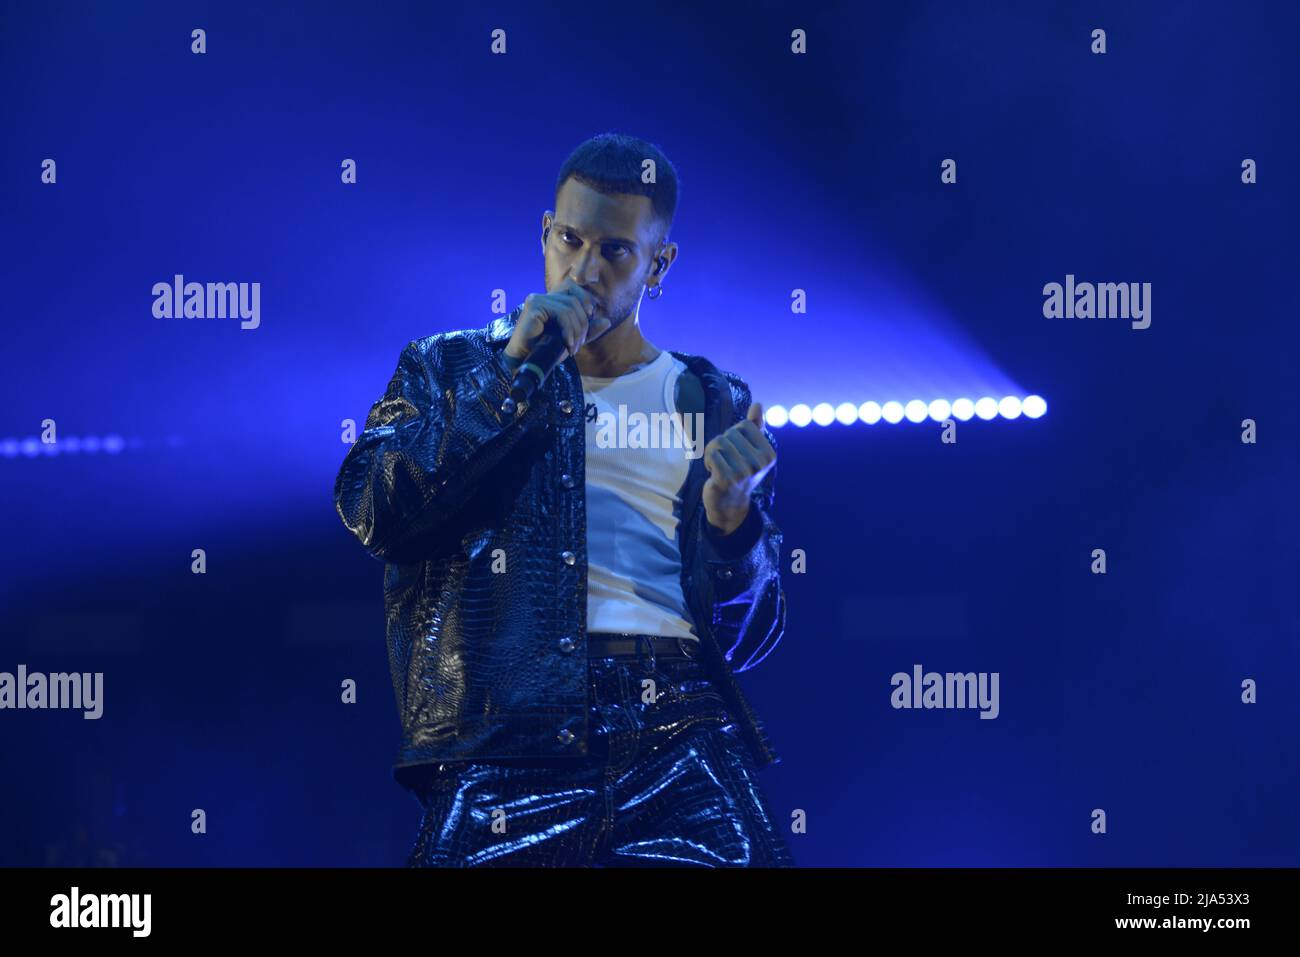 May 25, 2022, Padua, Italy: Alessandro Mahmoud, known professionally as Mahmood, is an Italian singer-songwriter. He rose to prominence after competing on the sixth season of the Italian version of The X Factor. He has won the Sanremo Music Festival twice, in 2019 with the song ''Soldi'' and in 2022 alongside Blanco with the song ''Brividi''. His Sanremo victories allowed him to represent Italy at the Eurovision Song Contest in those respective years, finishing in second place in 2019 and in sixth place in 2022 as the host entrant.[1][2][3]..Mahmood has released two studio albums, GioventÃ¹ br Stock Photo